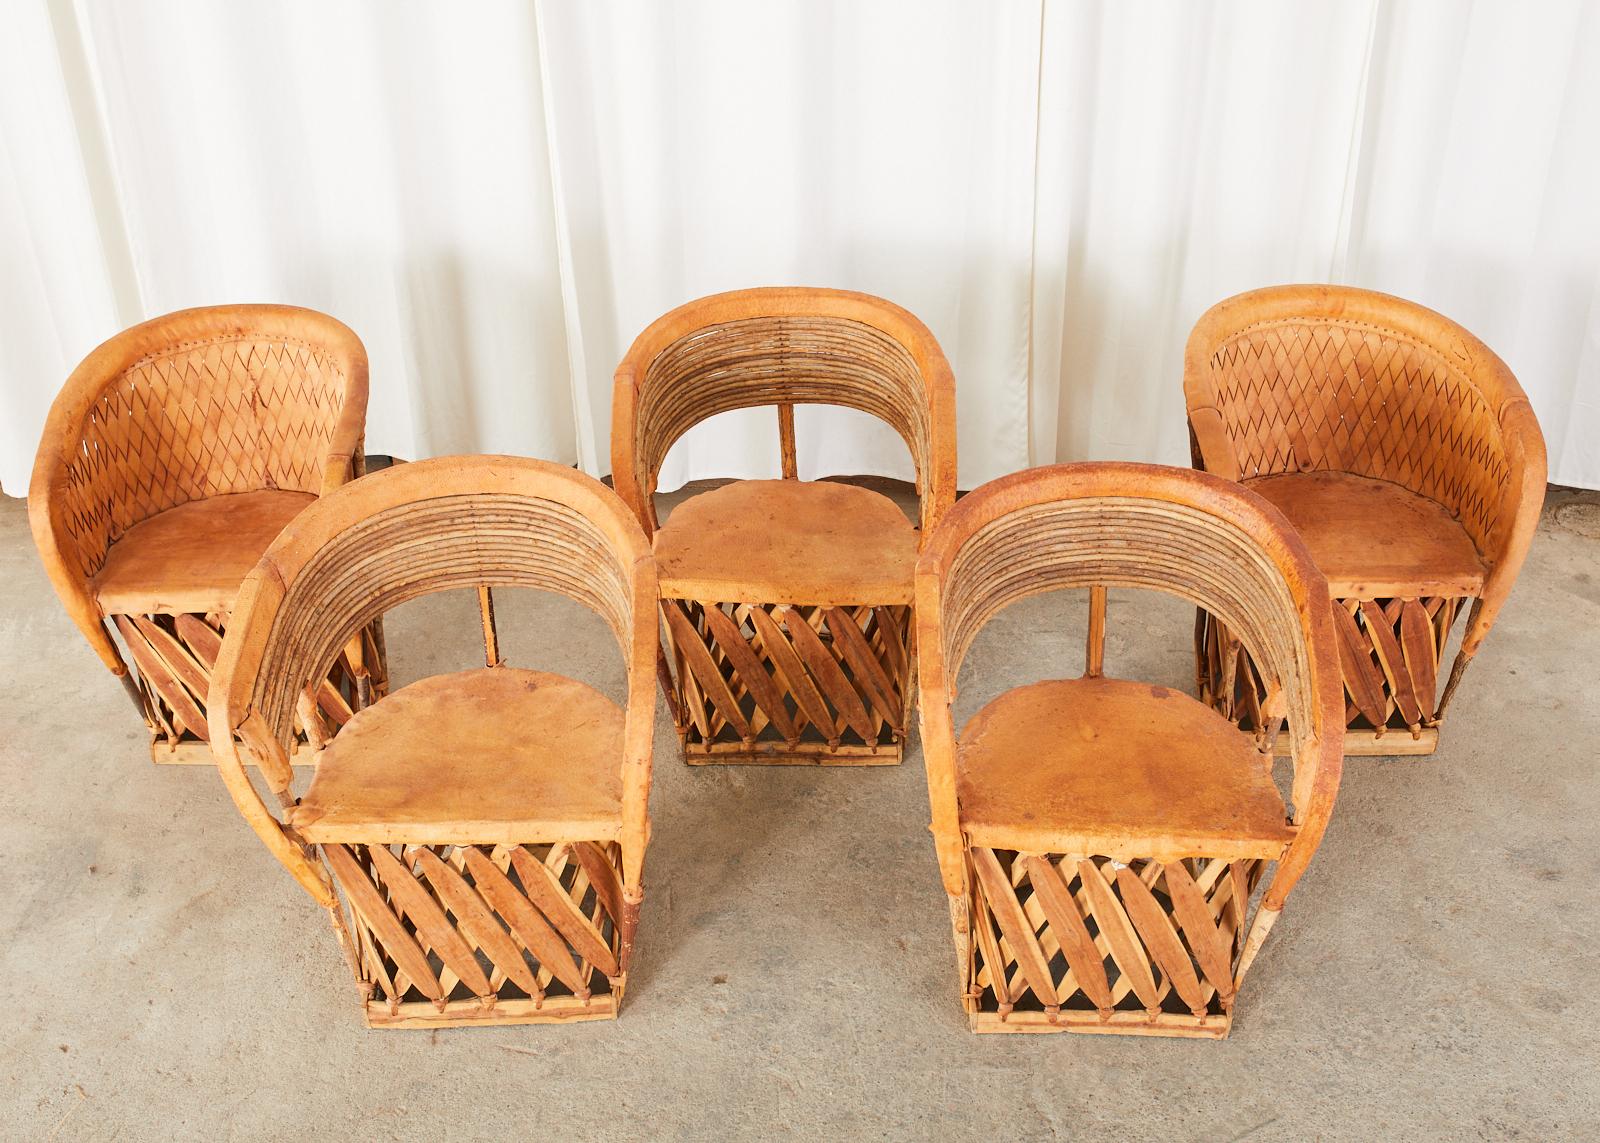 Rustic set of five assembled Mexican equipale chairs crafted from animal leather and cedar. The name 